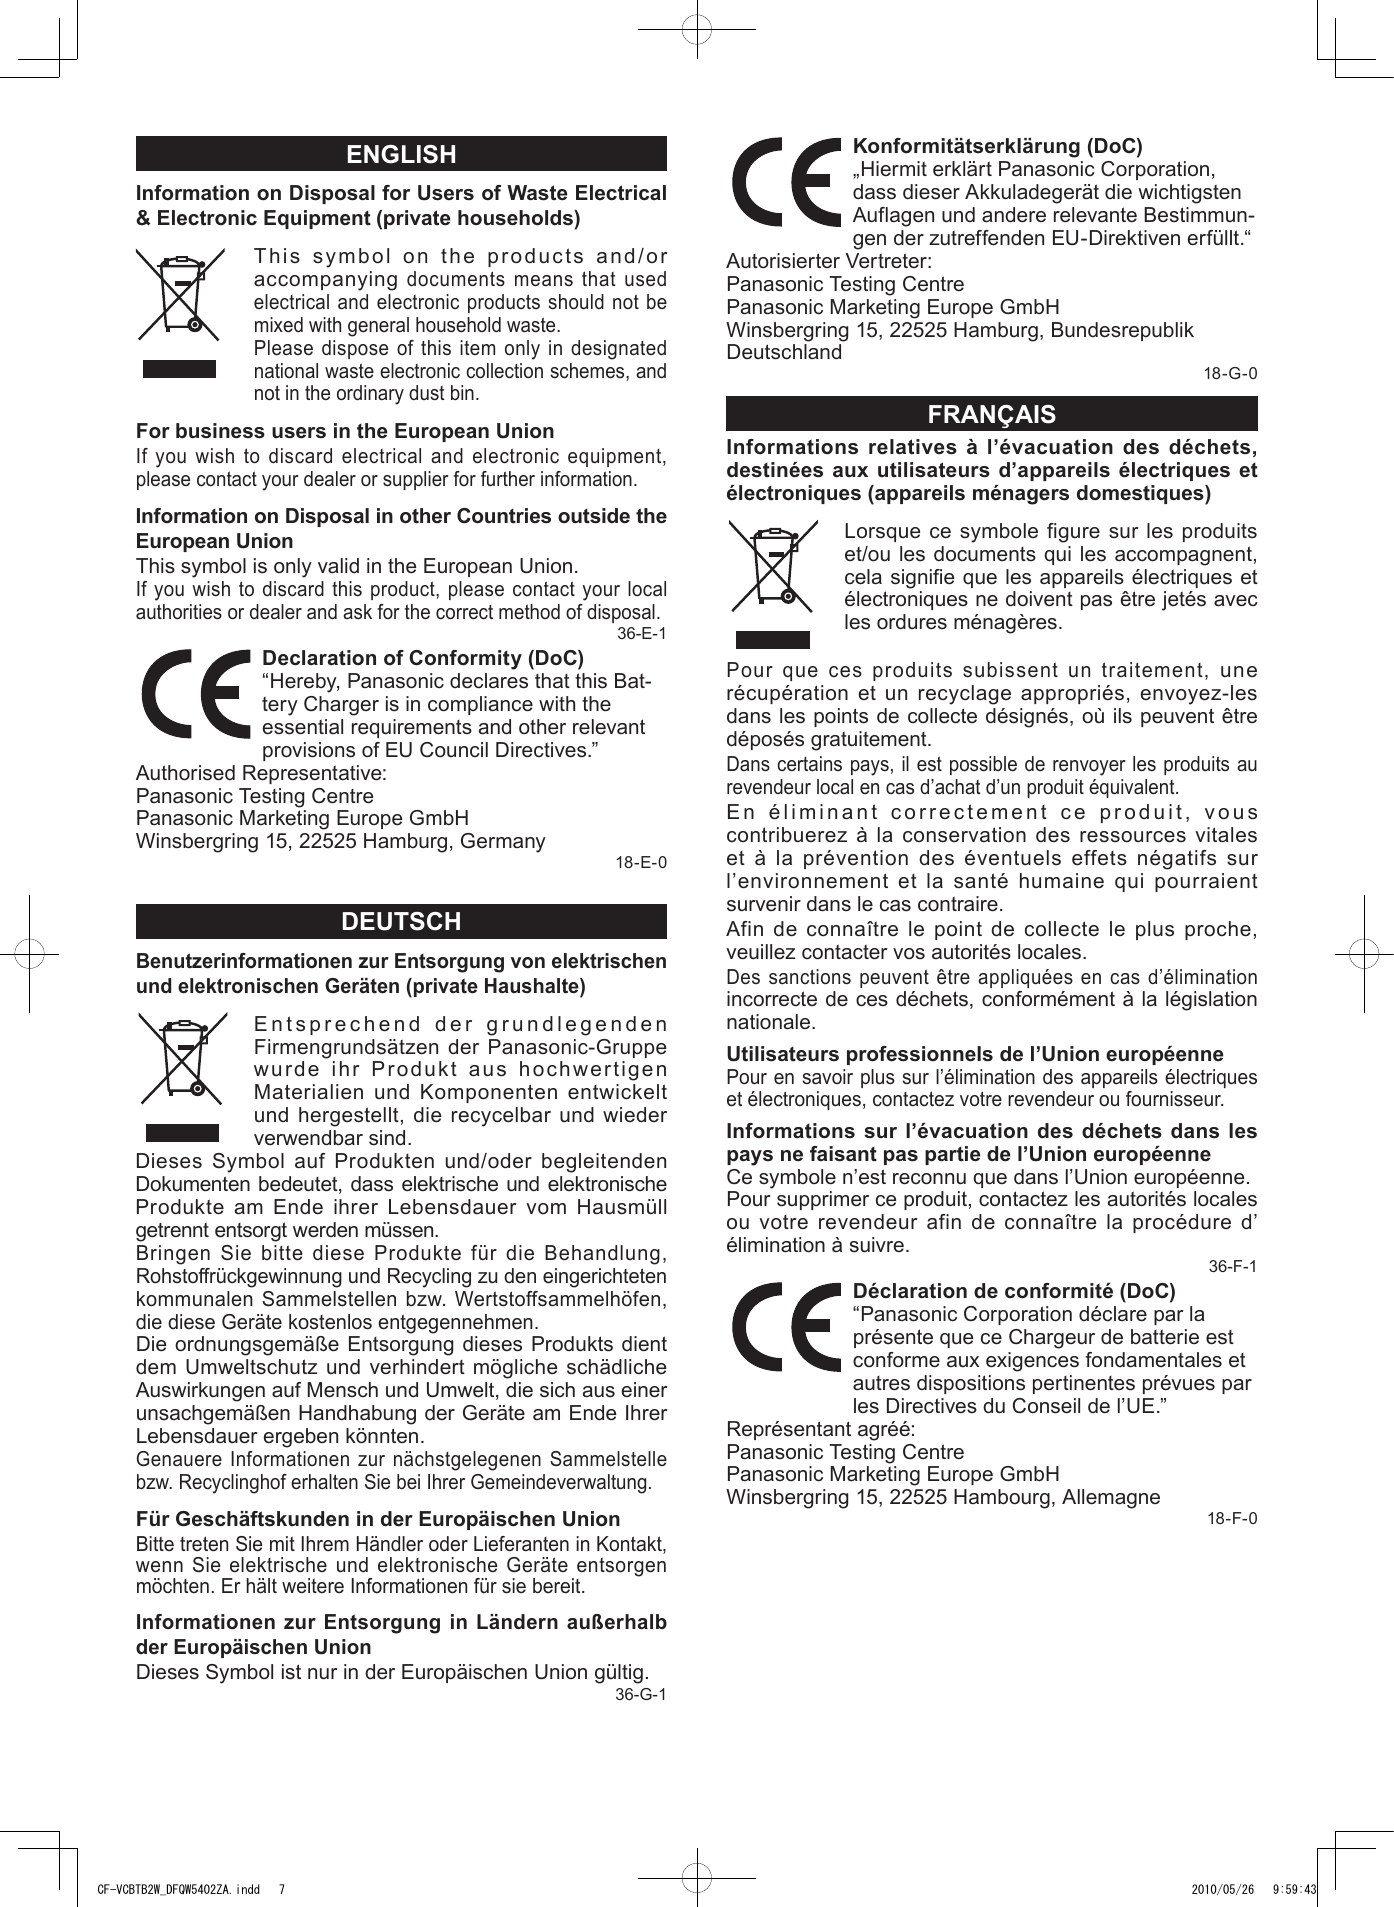 Page 6 of 8 - Panasonic CF-VCBxxx (Battery Charger) Operating Instructions User Manual : (English/ German/ French/ Korean/ Japanese) (Revision) Vcbtb2w-oi-dfqw5402ya-non-nonlogo-JMGFKO-p20110780